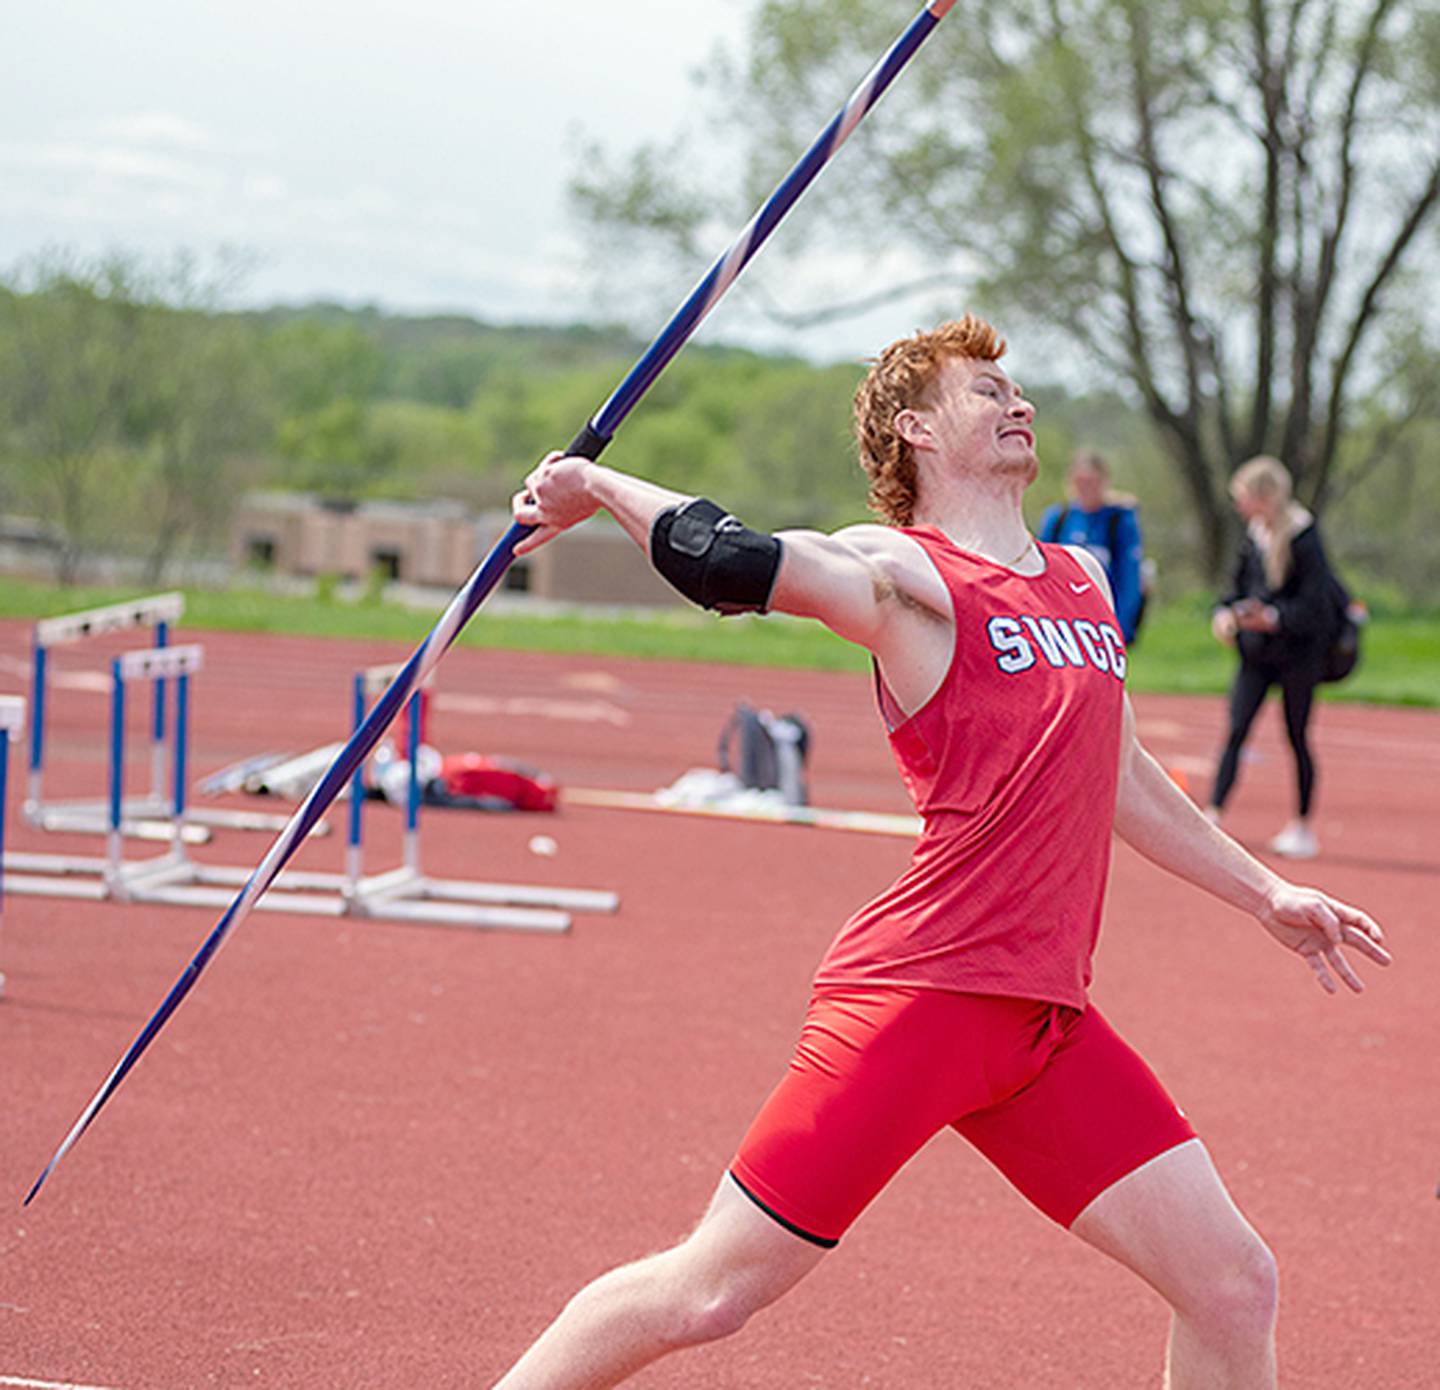 Southwestern freshman Jedd Weinkoetz throws the javelin at the regional meet in Council Bluffs. Weinkoetz placed fourth and qualified for the national meet with a thgrow of 45.91 meters.